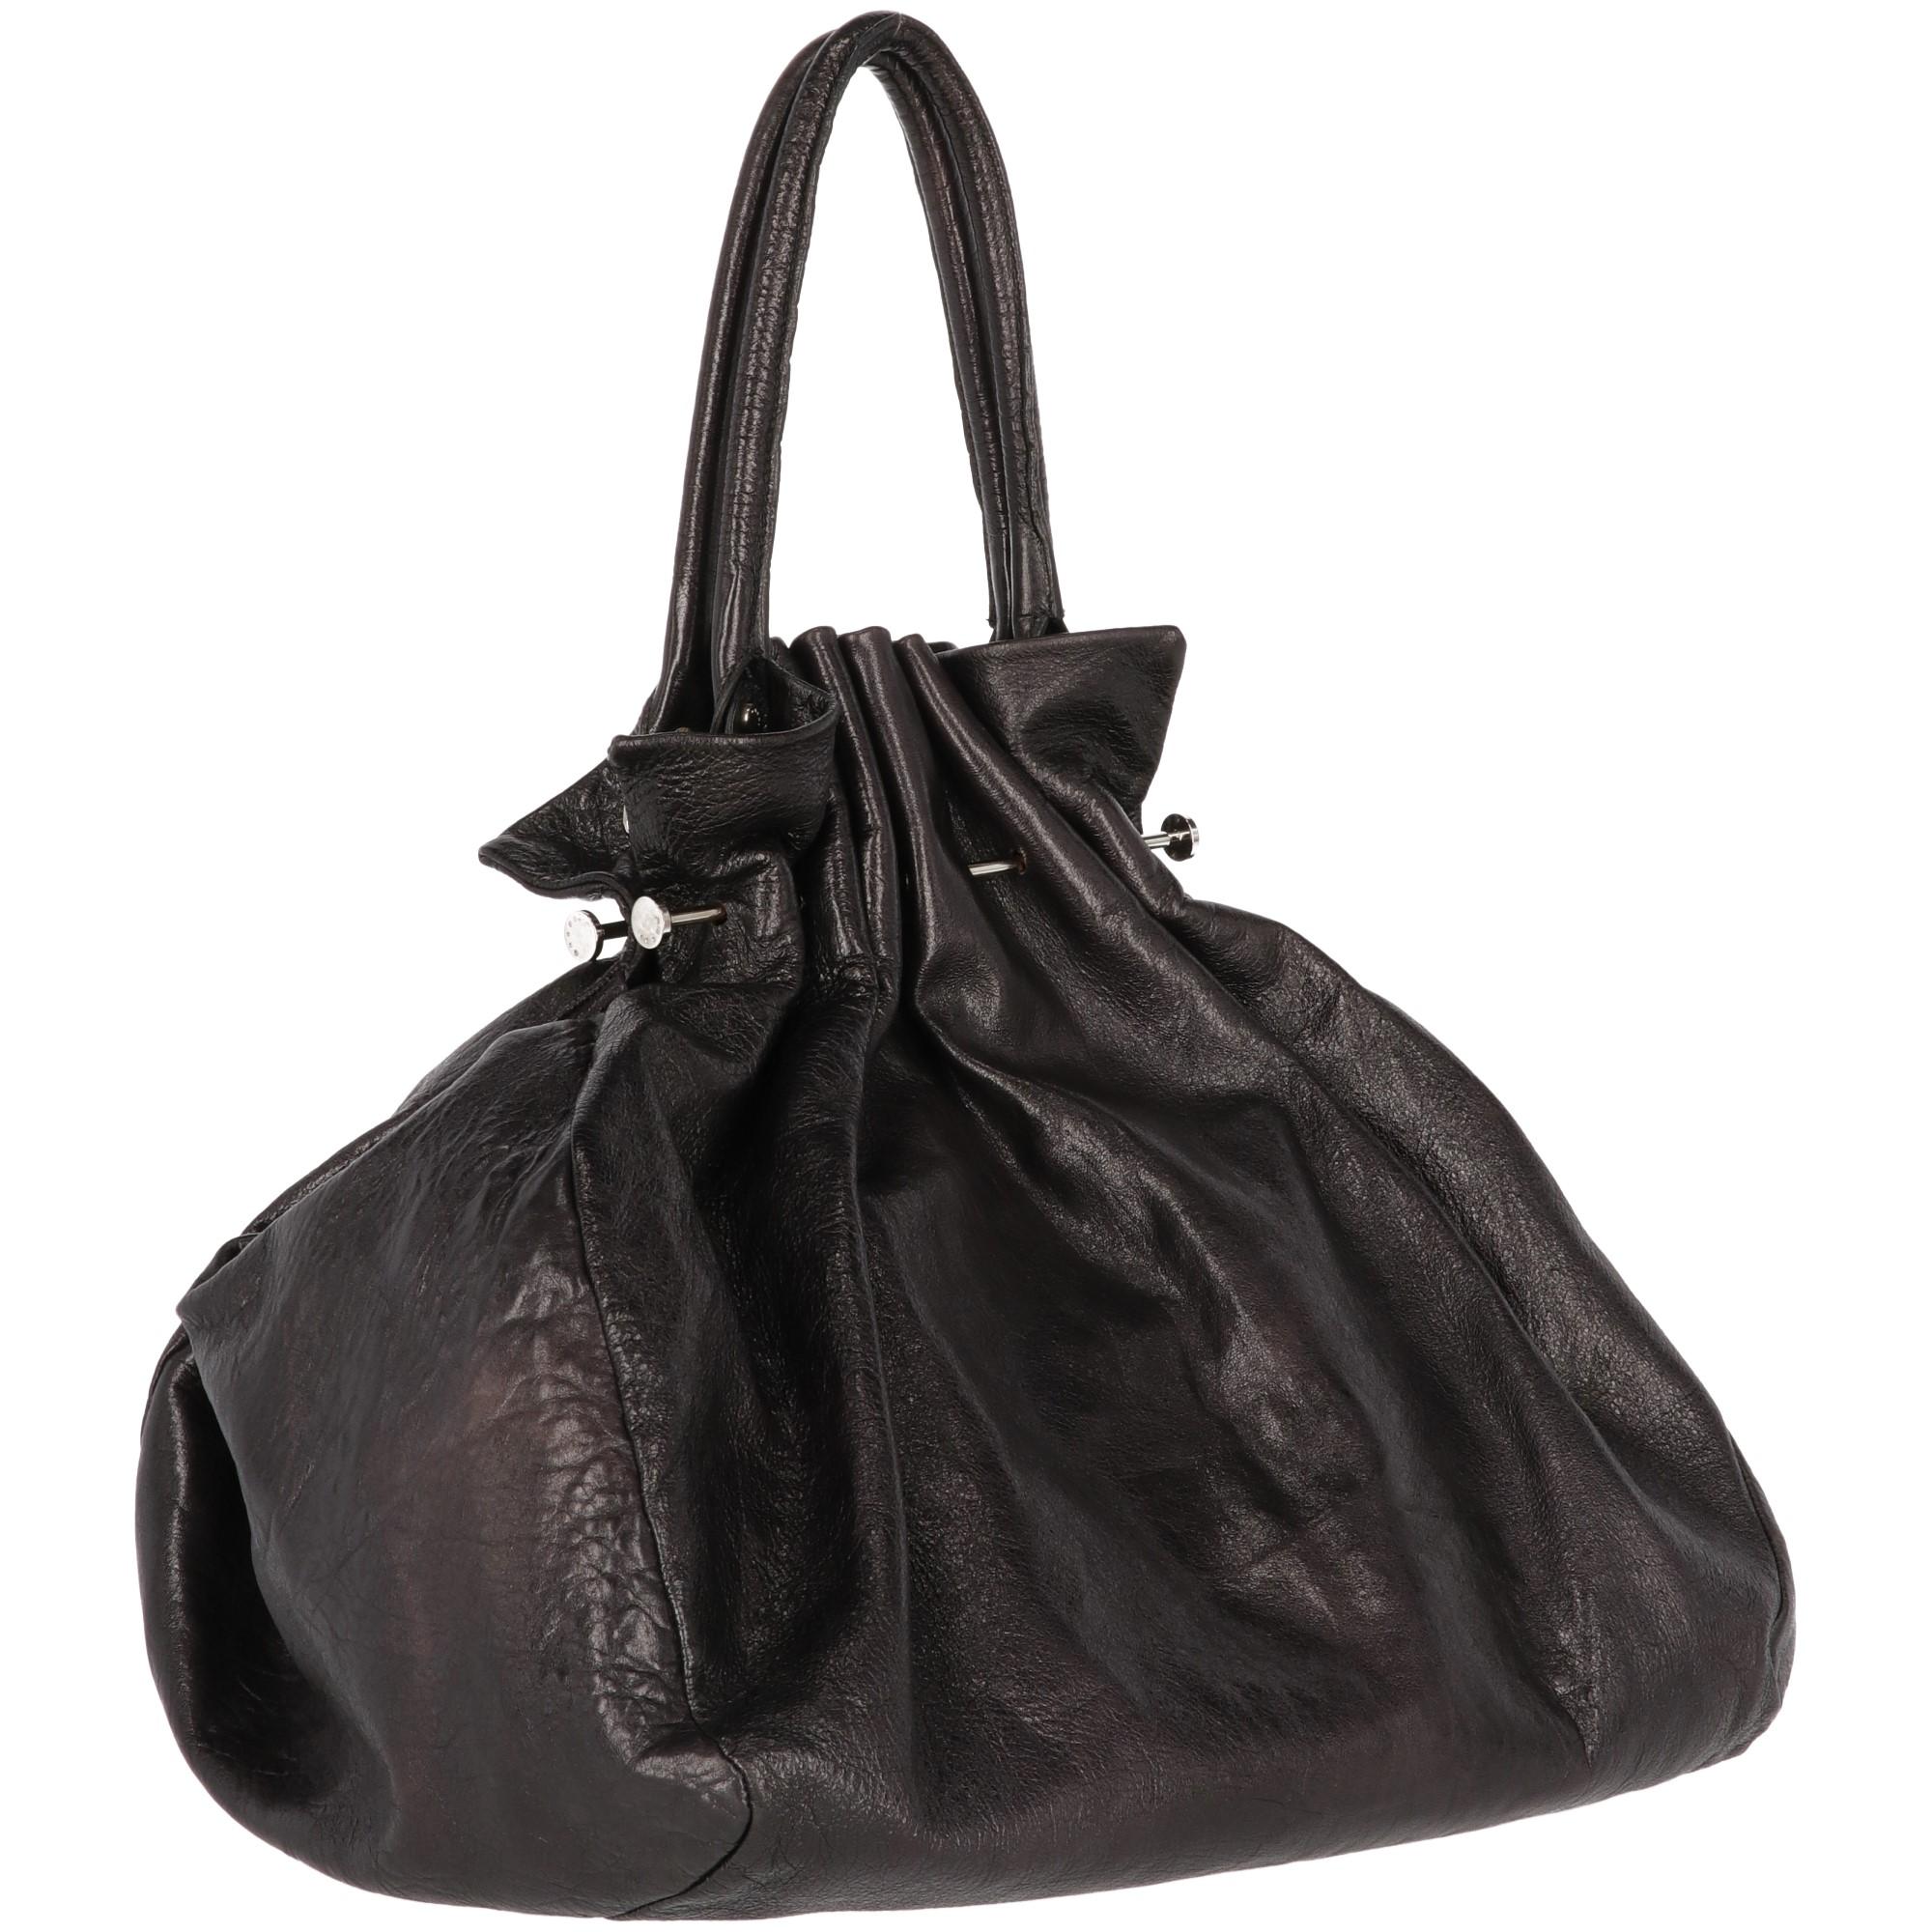 The stylish Marni black leather tote bag features decorative curliness details on both sides and silver-tone metal decorative details. With removable handles and inner pockets, the bag shows lightly fading signs at leather, as shown in the